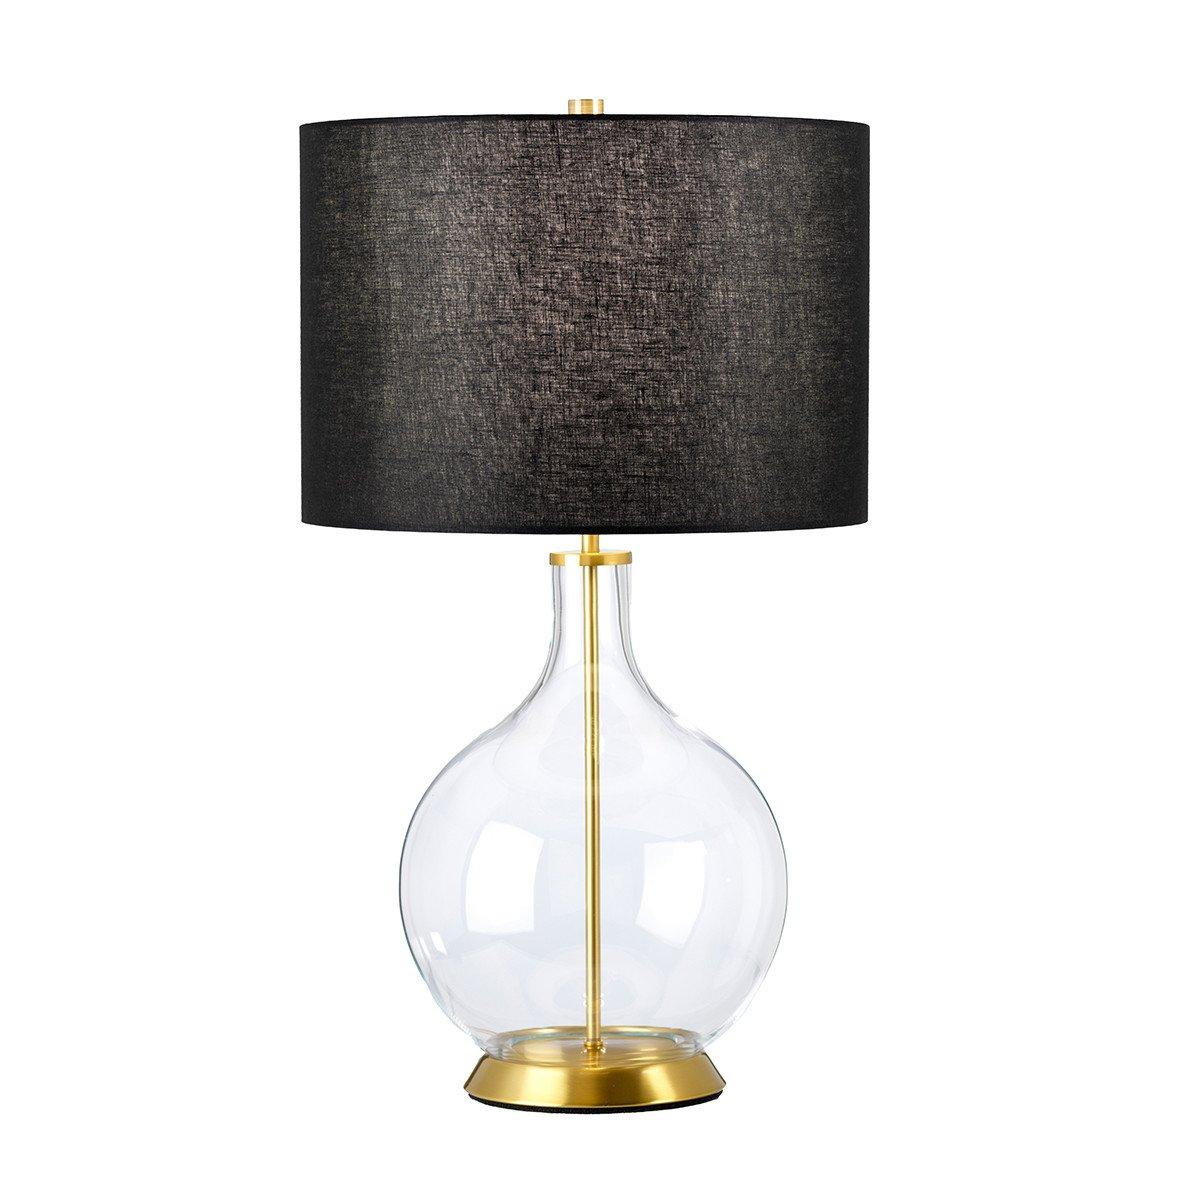 Orb Table Lamp with Round Shade Aged Brass